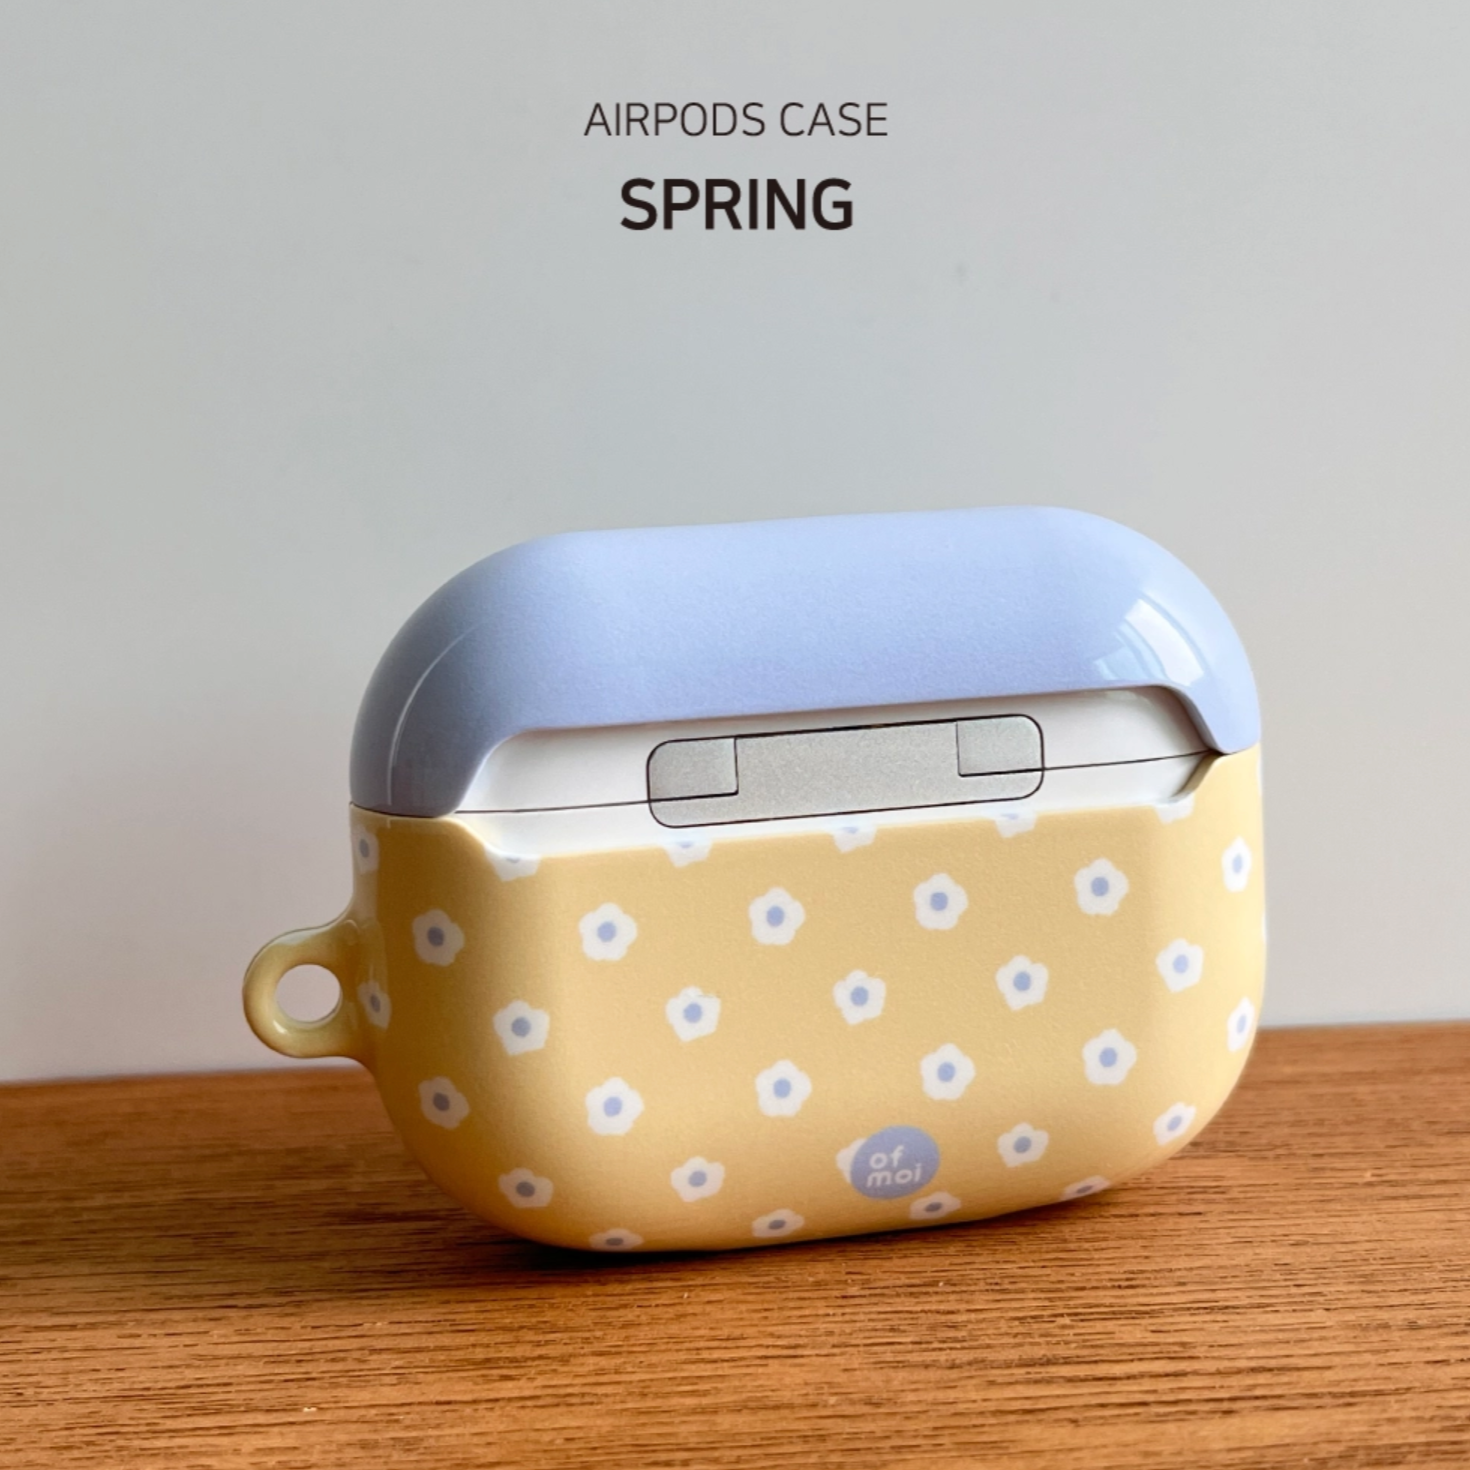 [ofmoi] Spring Airpods Case